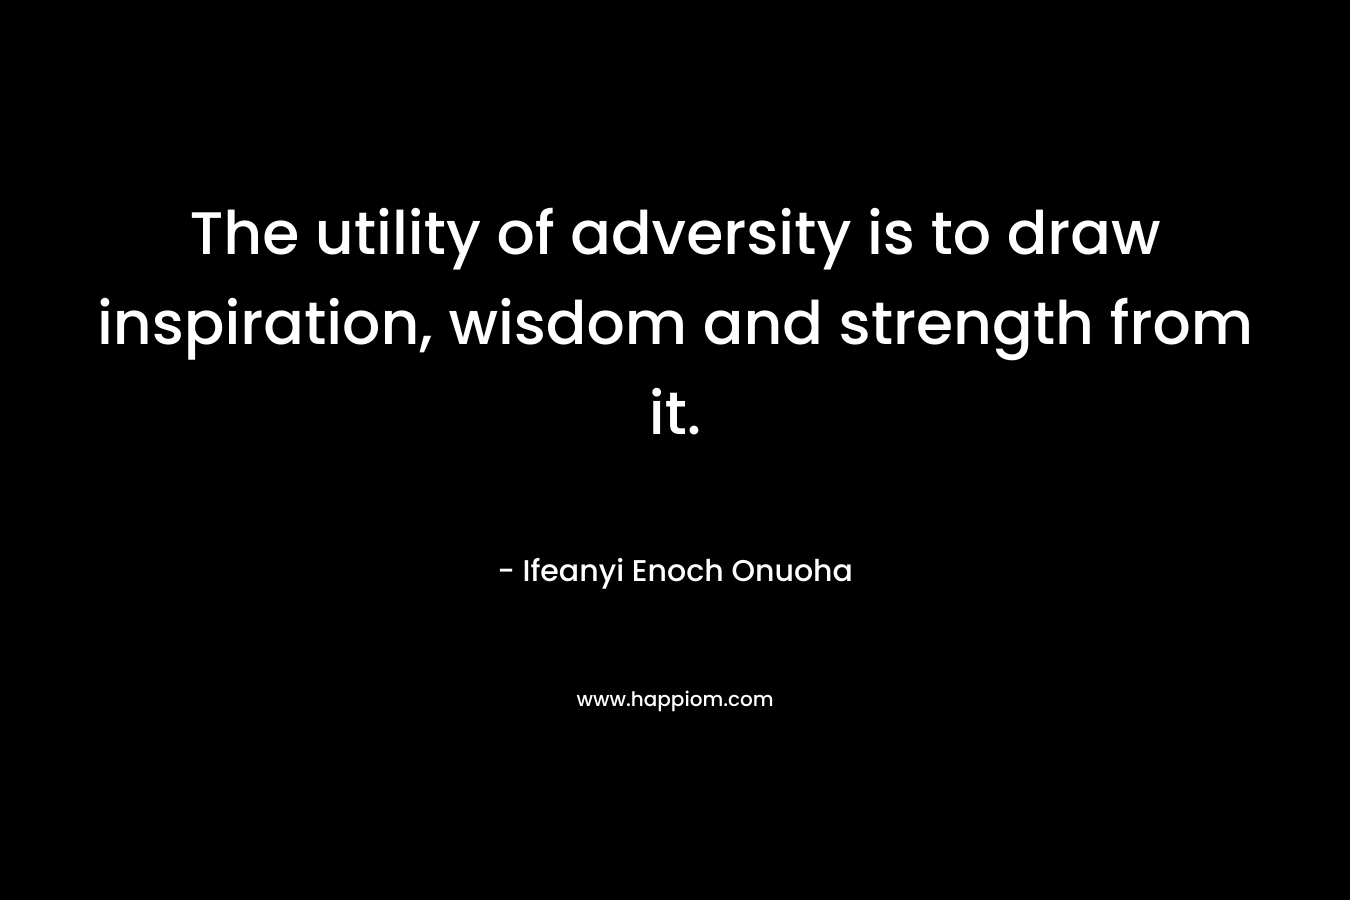 The utility of adversity is to draw inspiration, wisdom and strength from it. – Ifeanyi Enoch Onuoha